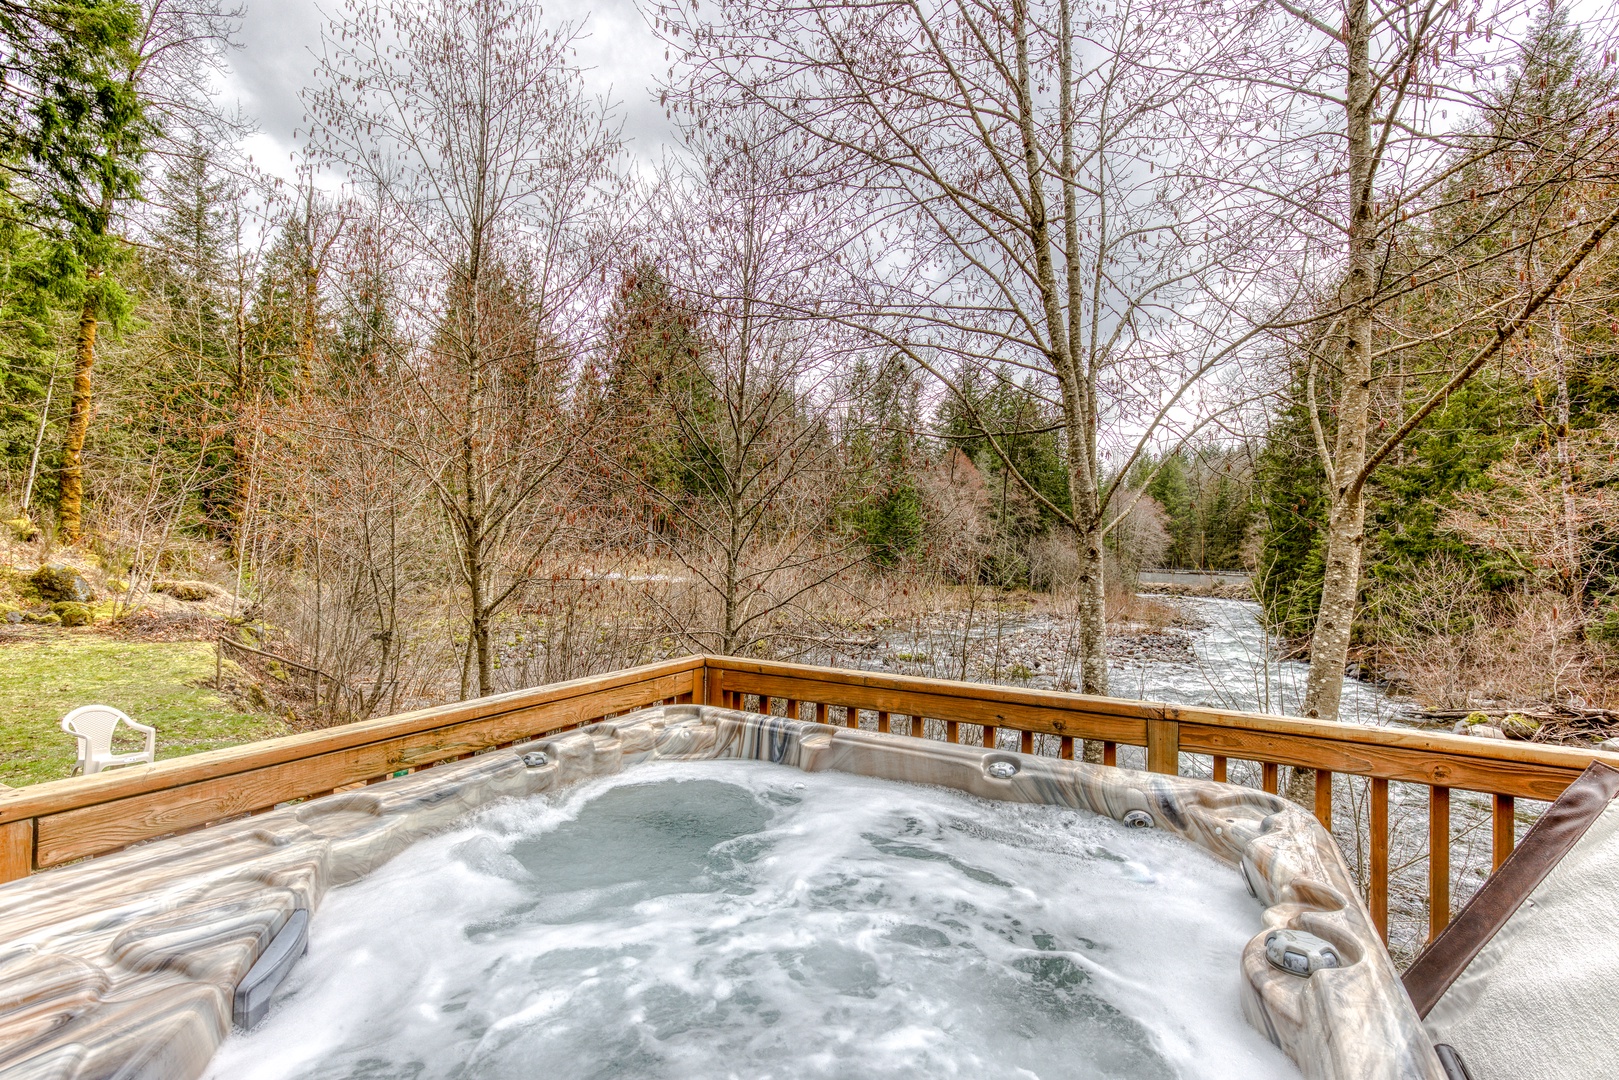 Rhododendron Vacation Rentals, Riverbend Cabin #2 - View of the river from the private hot tub